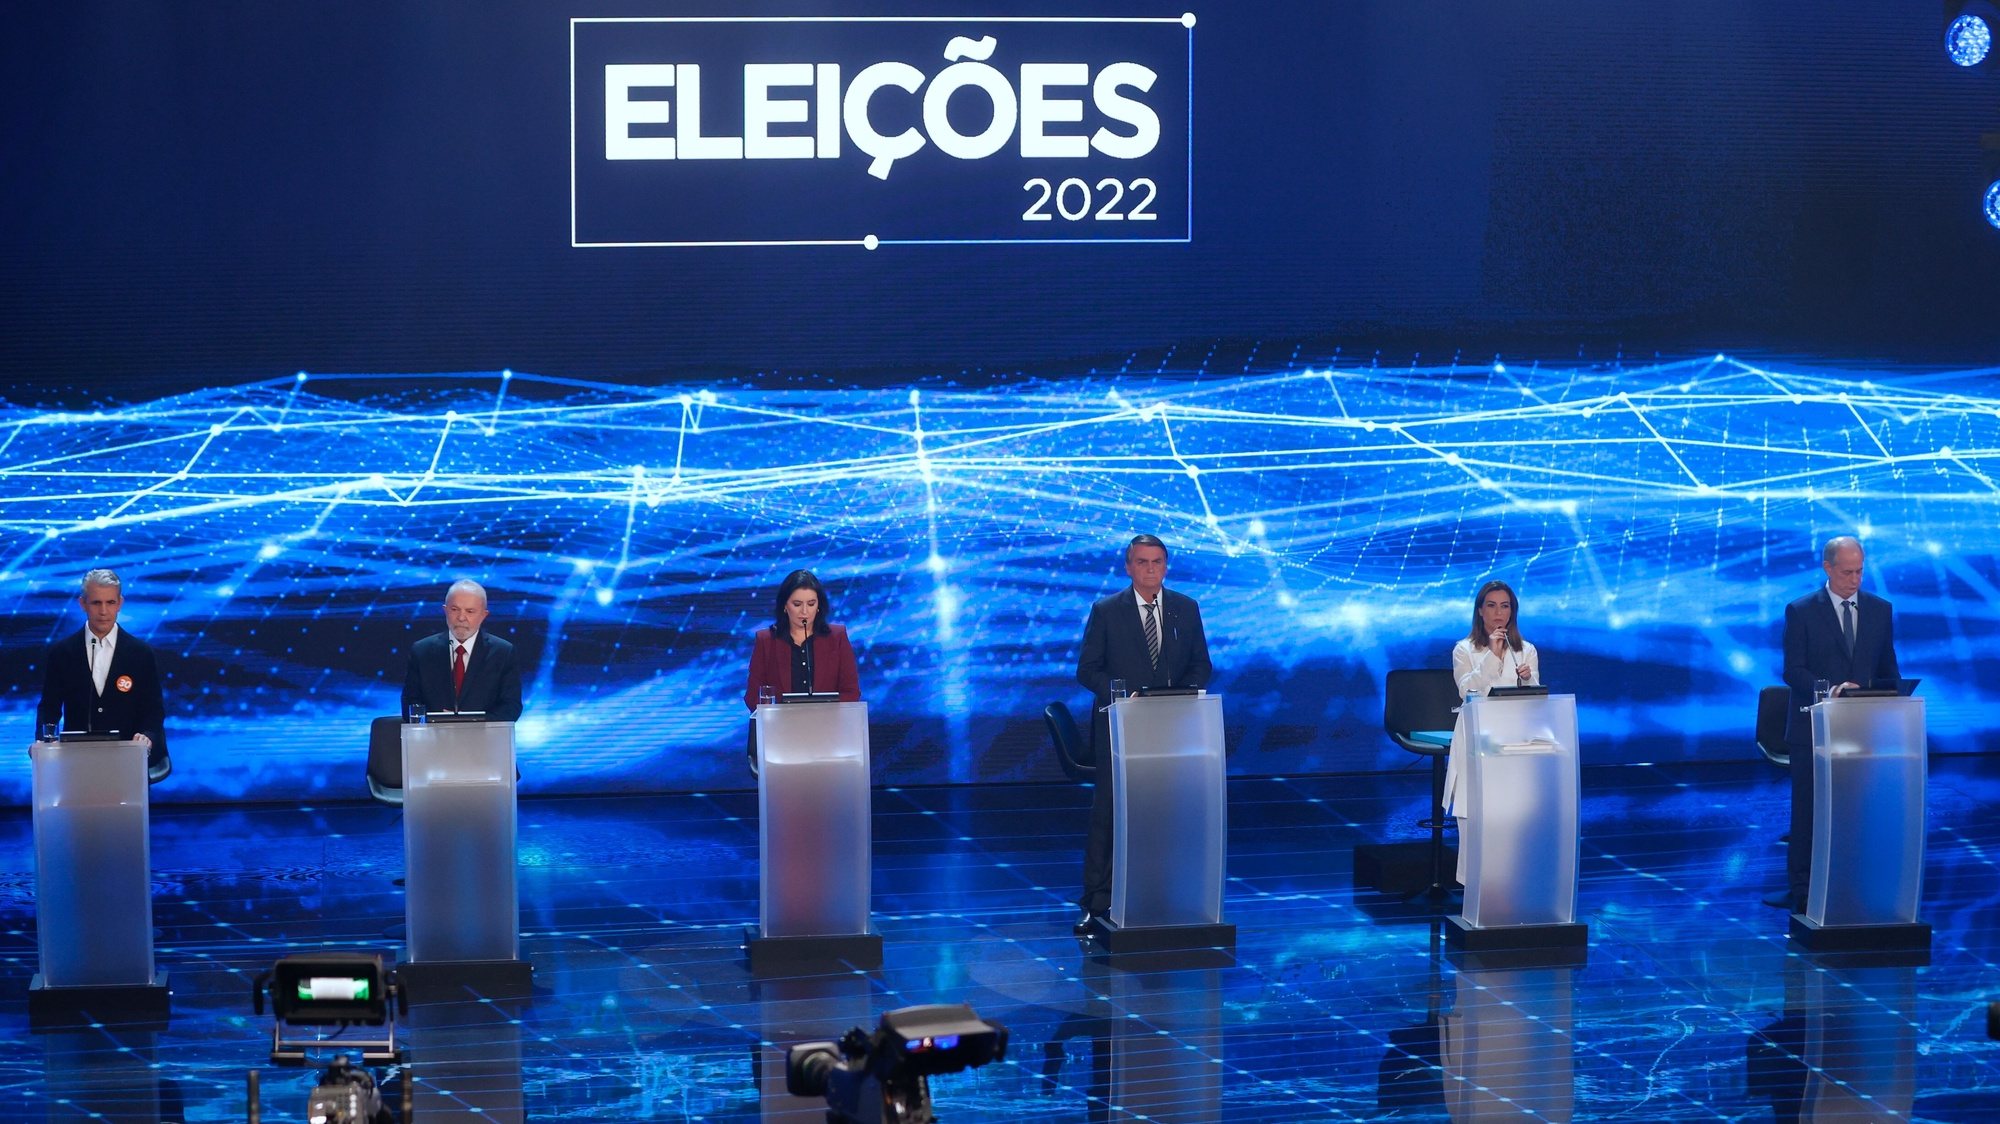 epa10144591 (L-R) Candidate Felipe d&#039;Avila, former president Luiz Inacio Lula da Silva, candidate Simonte Tebet, Brazilian president Jair Bolsonaro, candidate Soraya Thronicke and Ciro Gomes, participate in a debate at the television headquarters of Bandeirantes in Sao Paulo, Brazil, 28 August 2022. The Brazilian president, Jair Bolsonaro, attended the first debate ahead of the elections on 02 October, after having kept his participation unknown until the last minute.  EPA/Fernando Bizerra